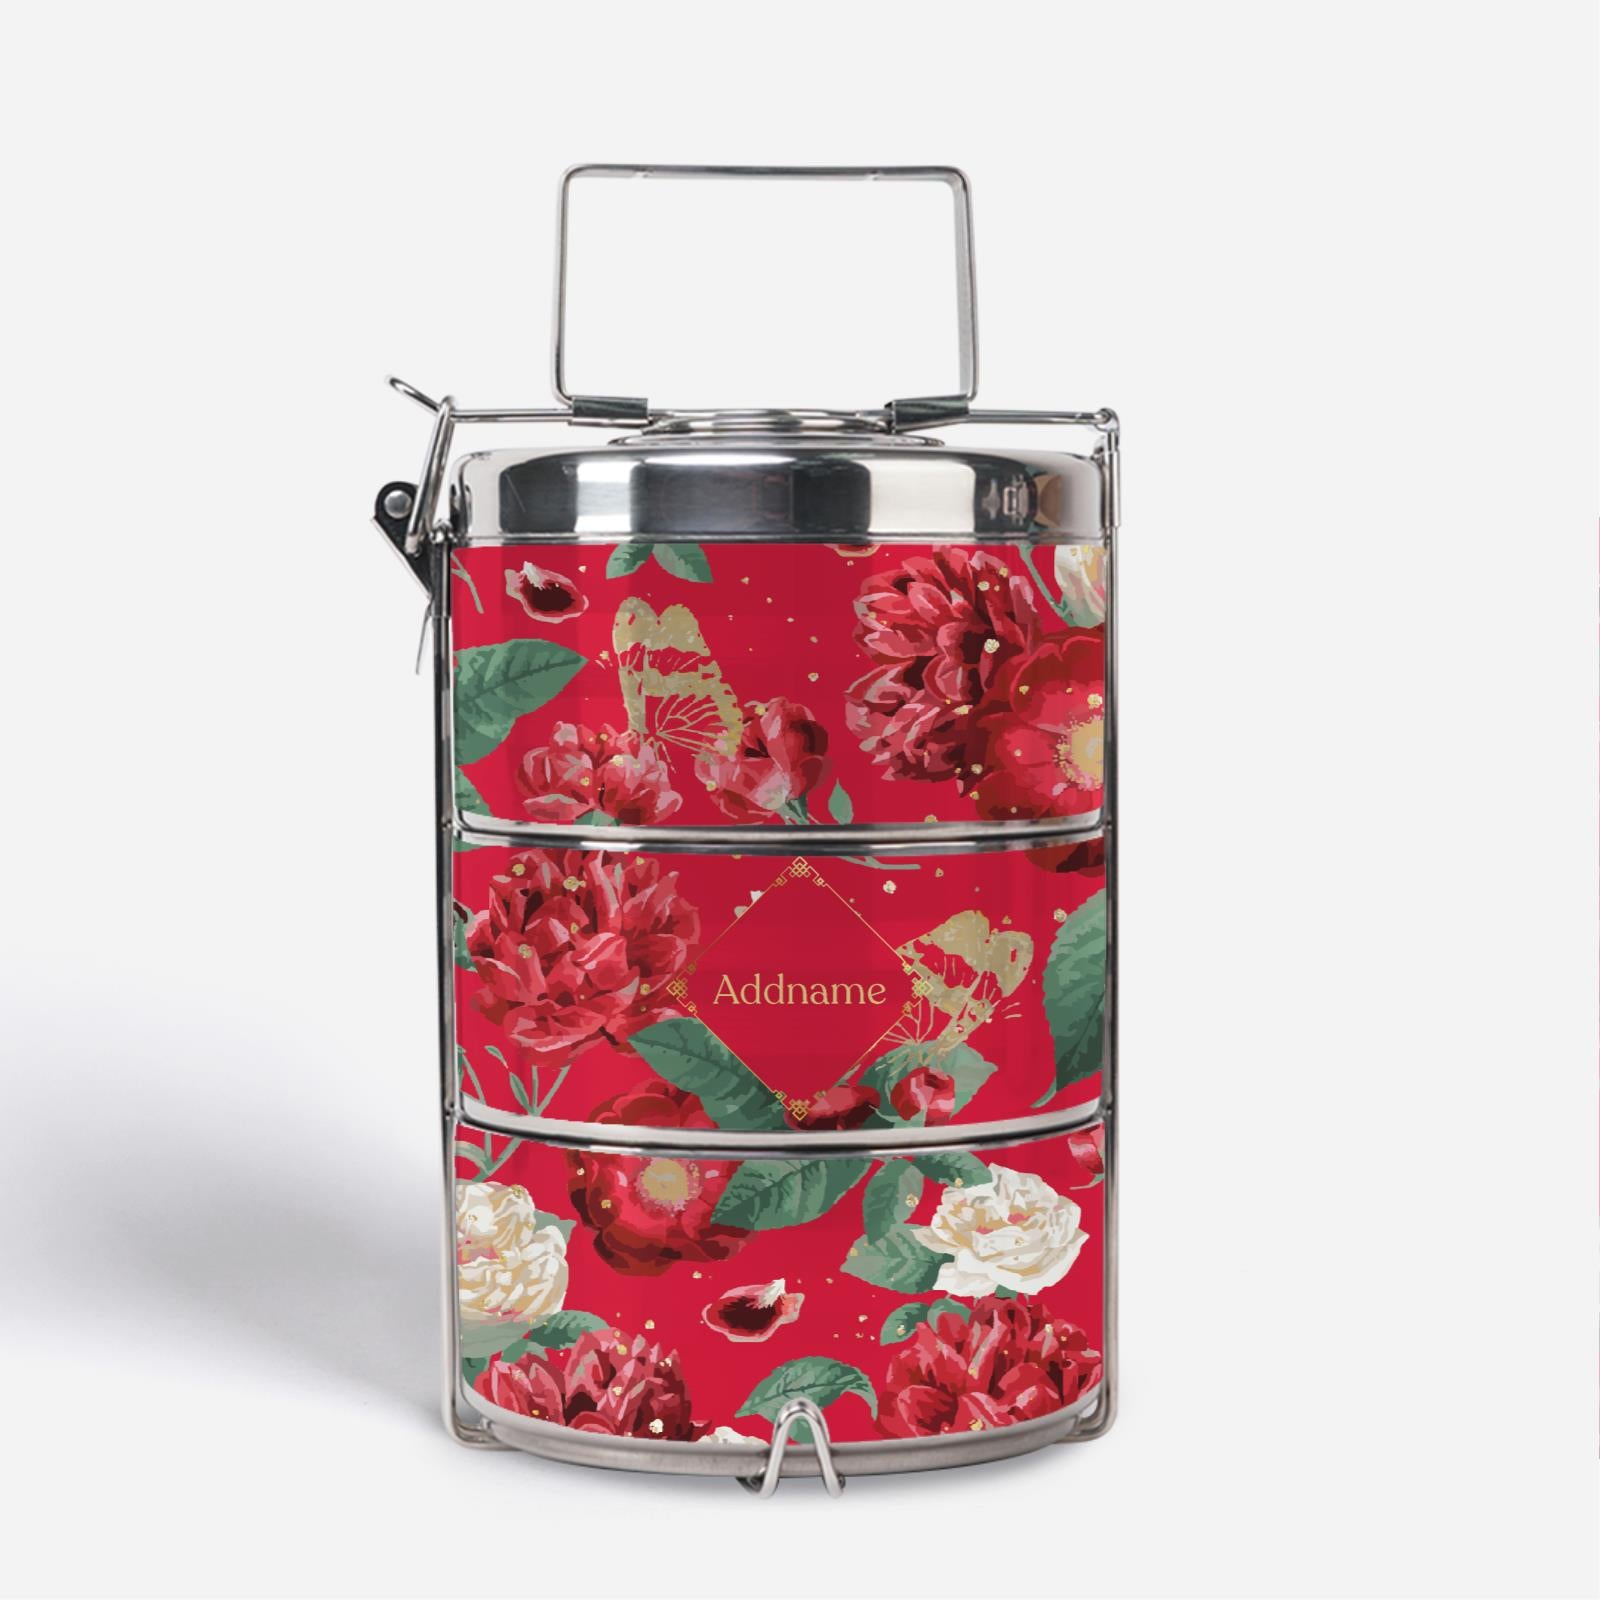 Royal Floral Series With English Personalization Premium Tiffin Carrier - Scorching Passion